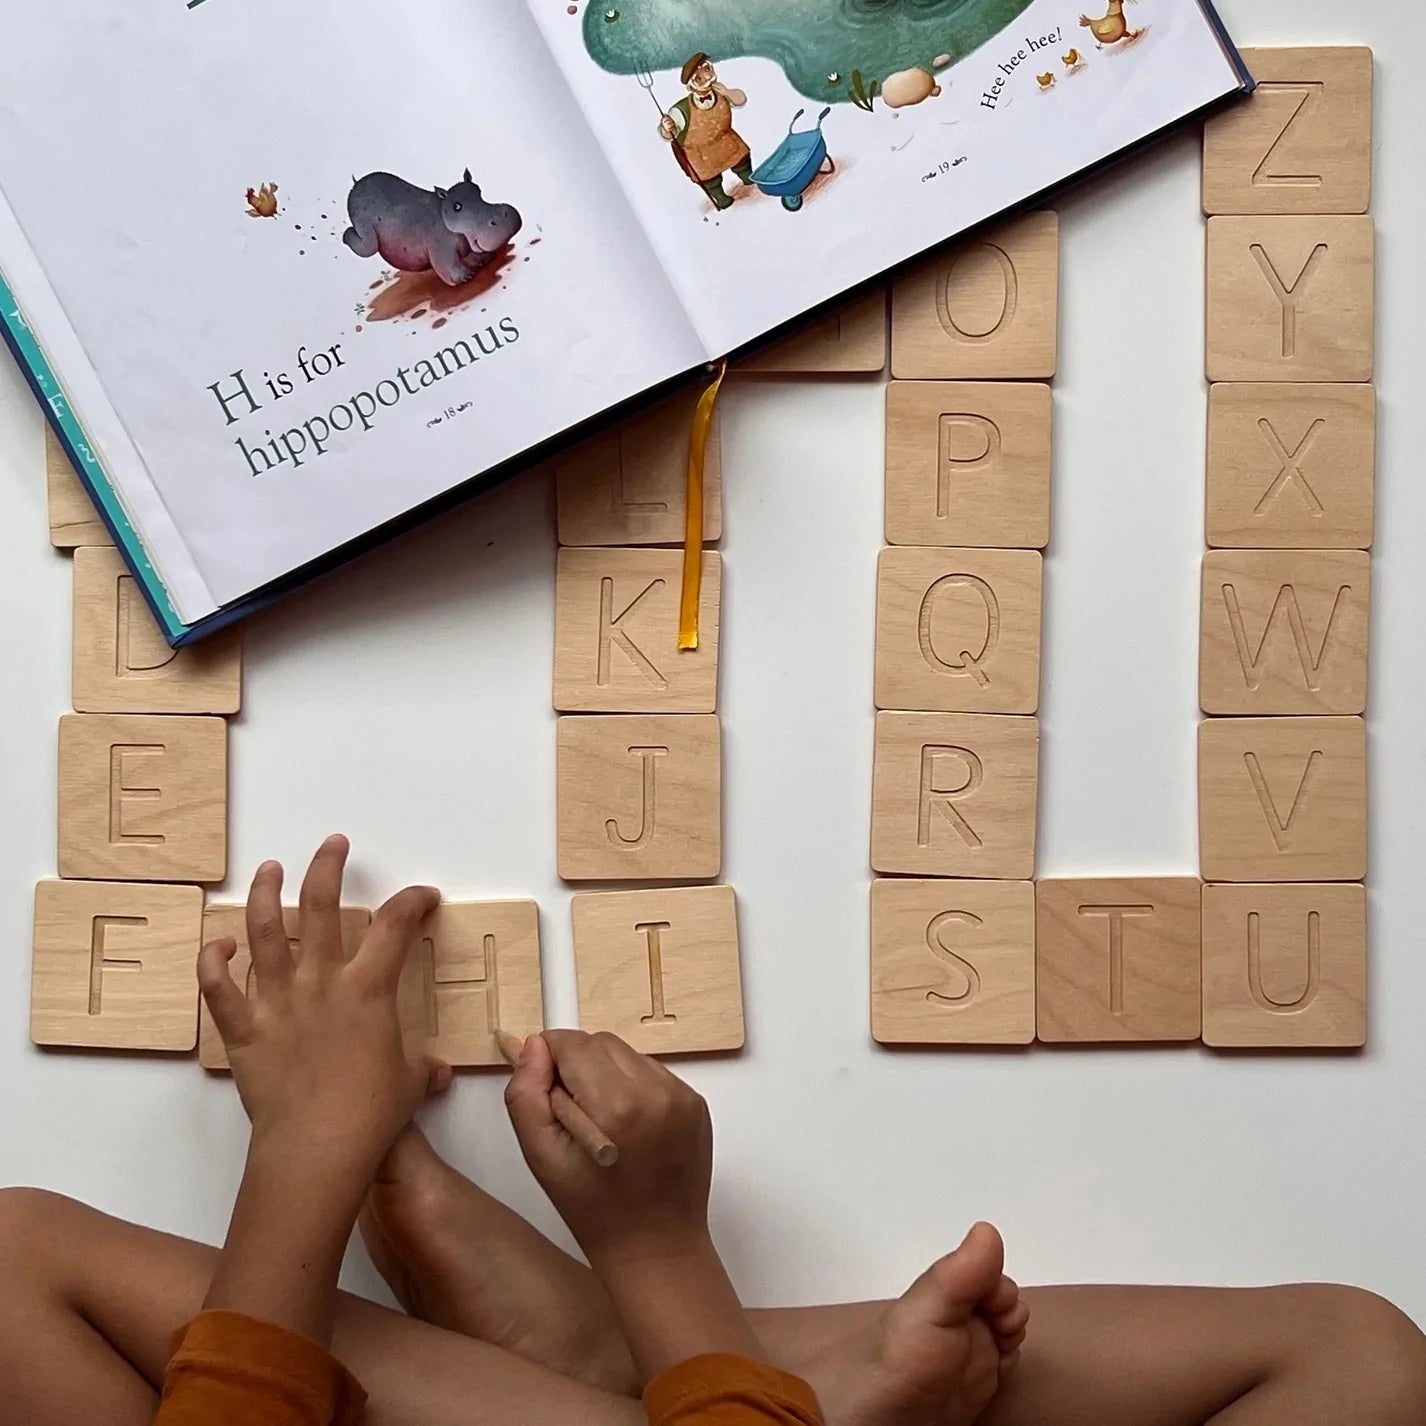 Buy Alphabets Letter Tracing Wooden Tiles - Real Image 2 - SkilloToys.com